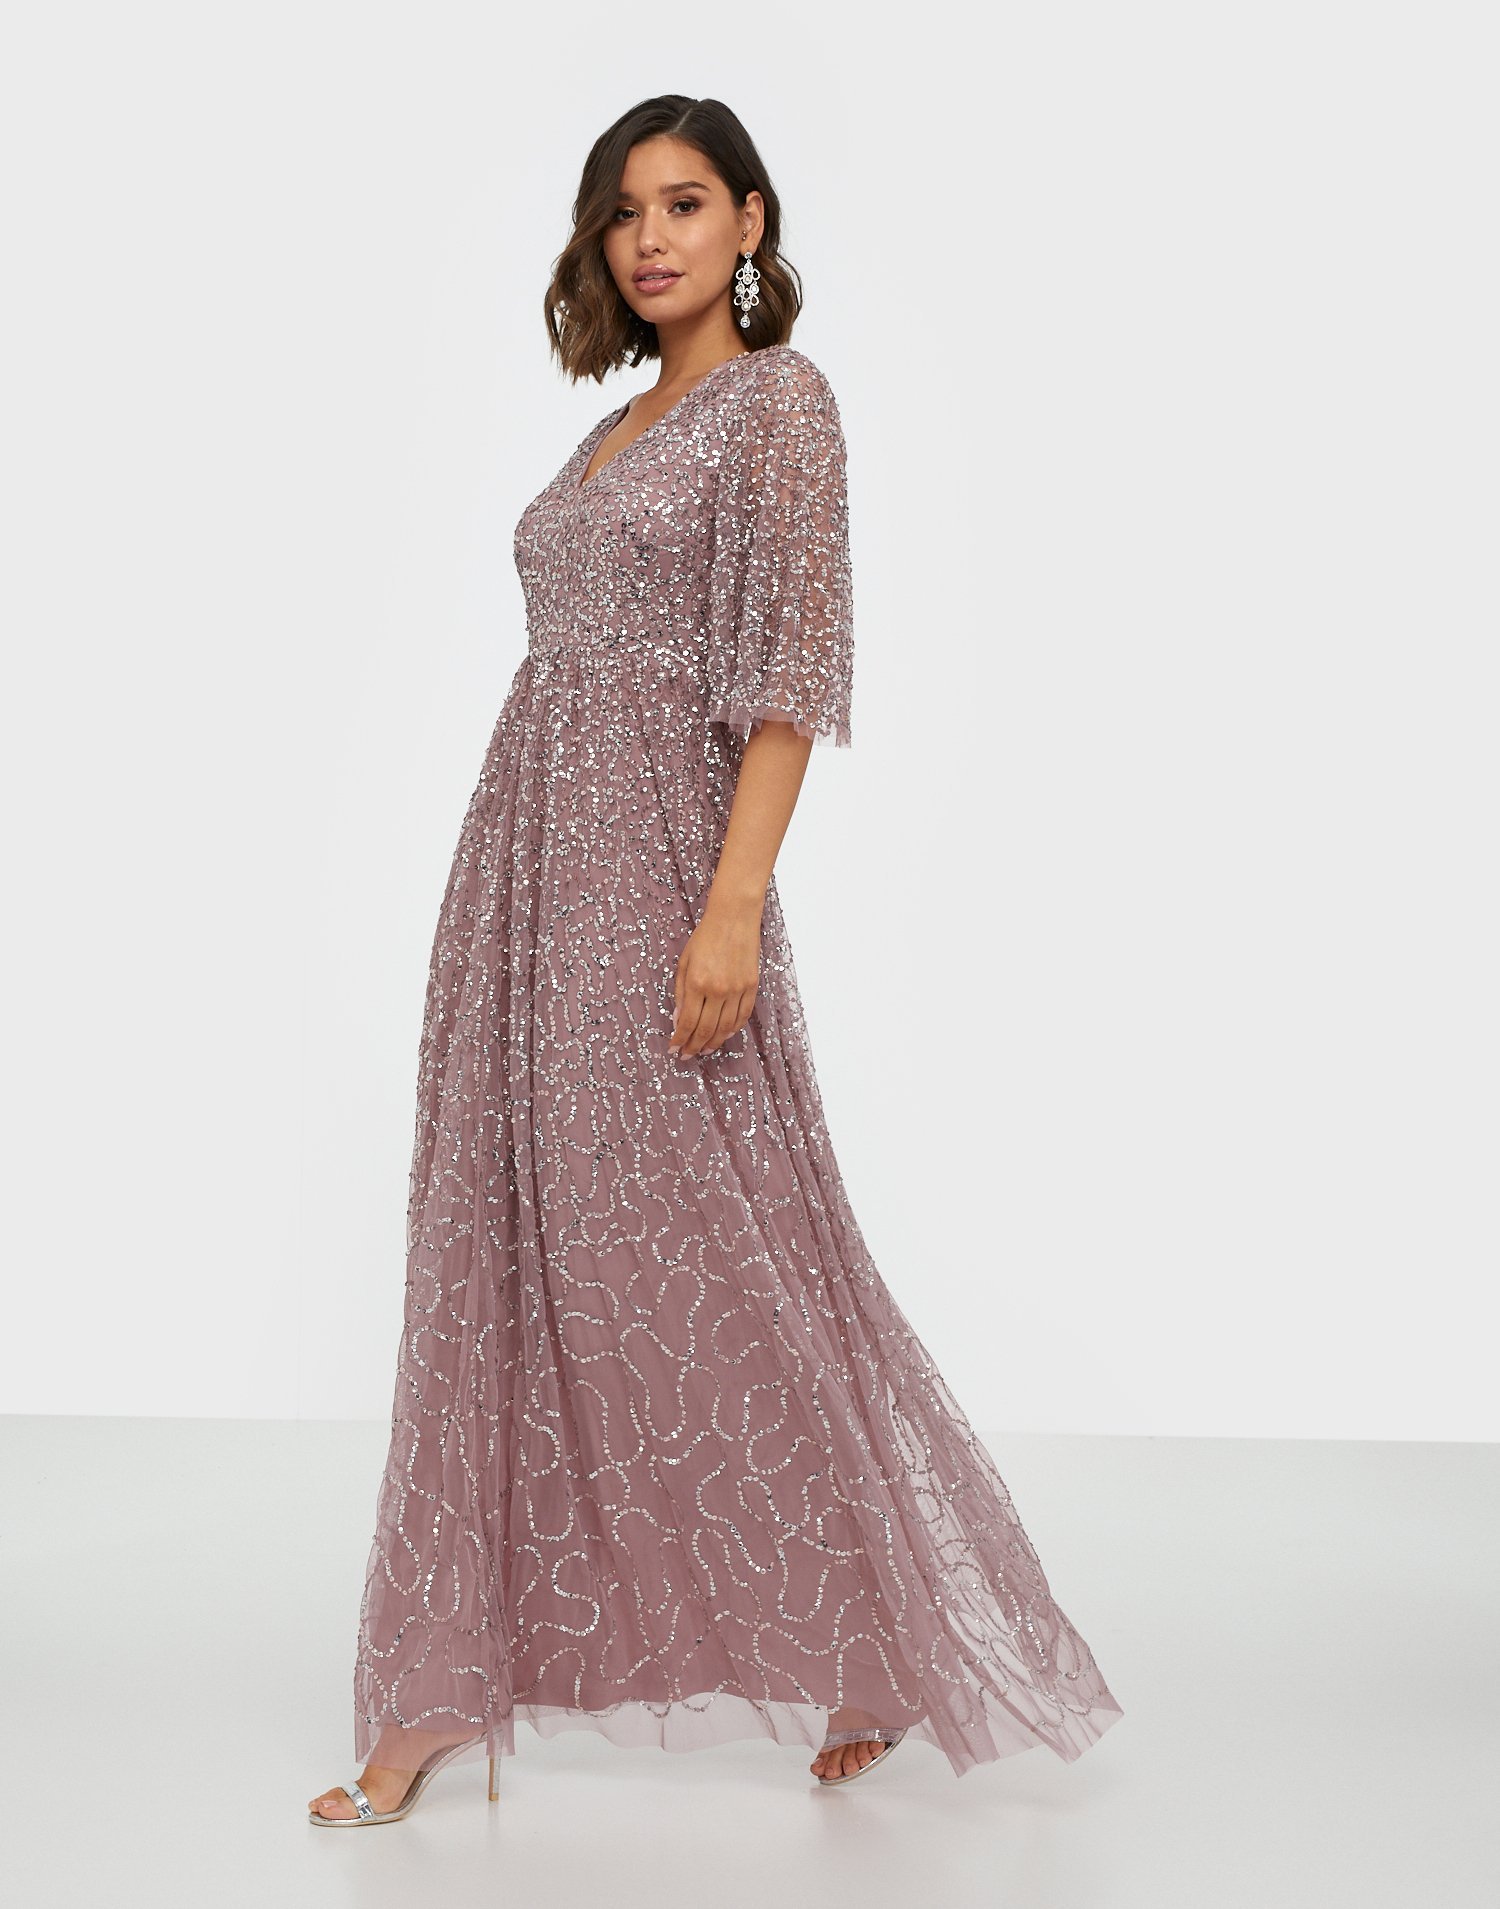 embellished maxi dresses with sleeves